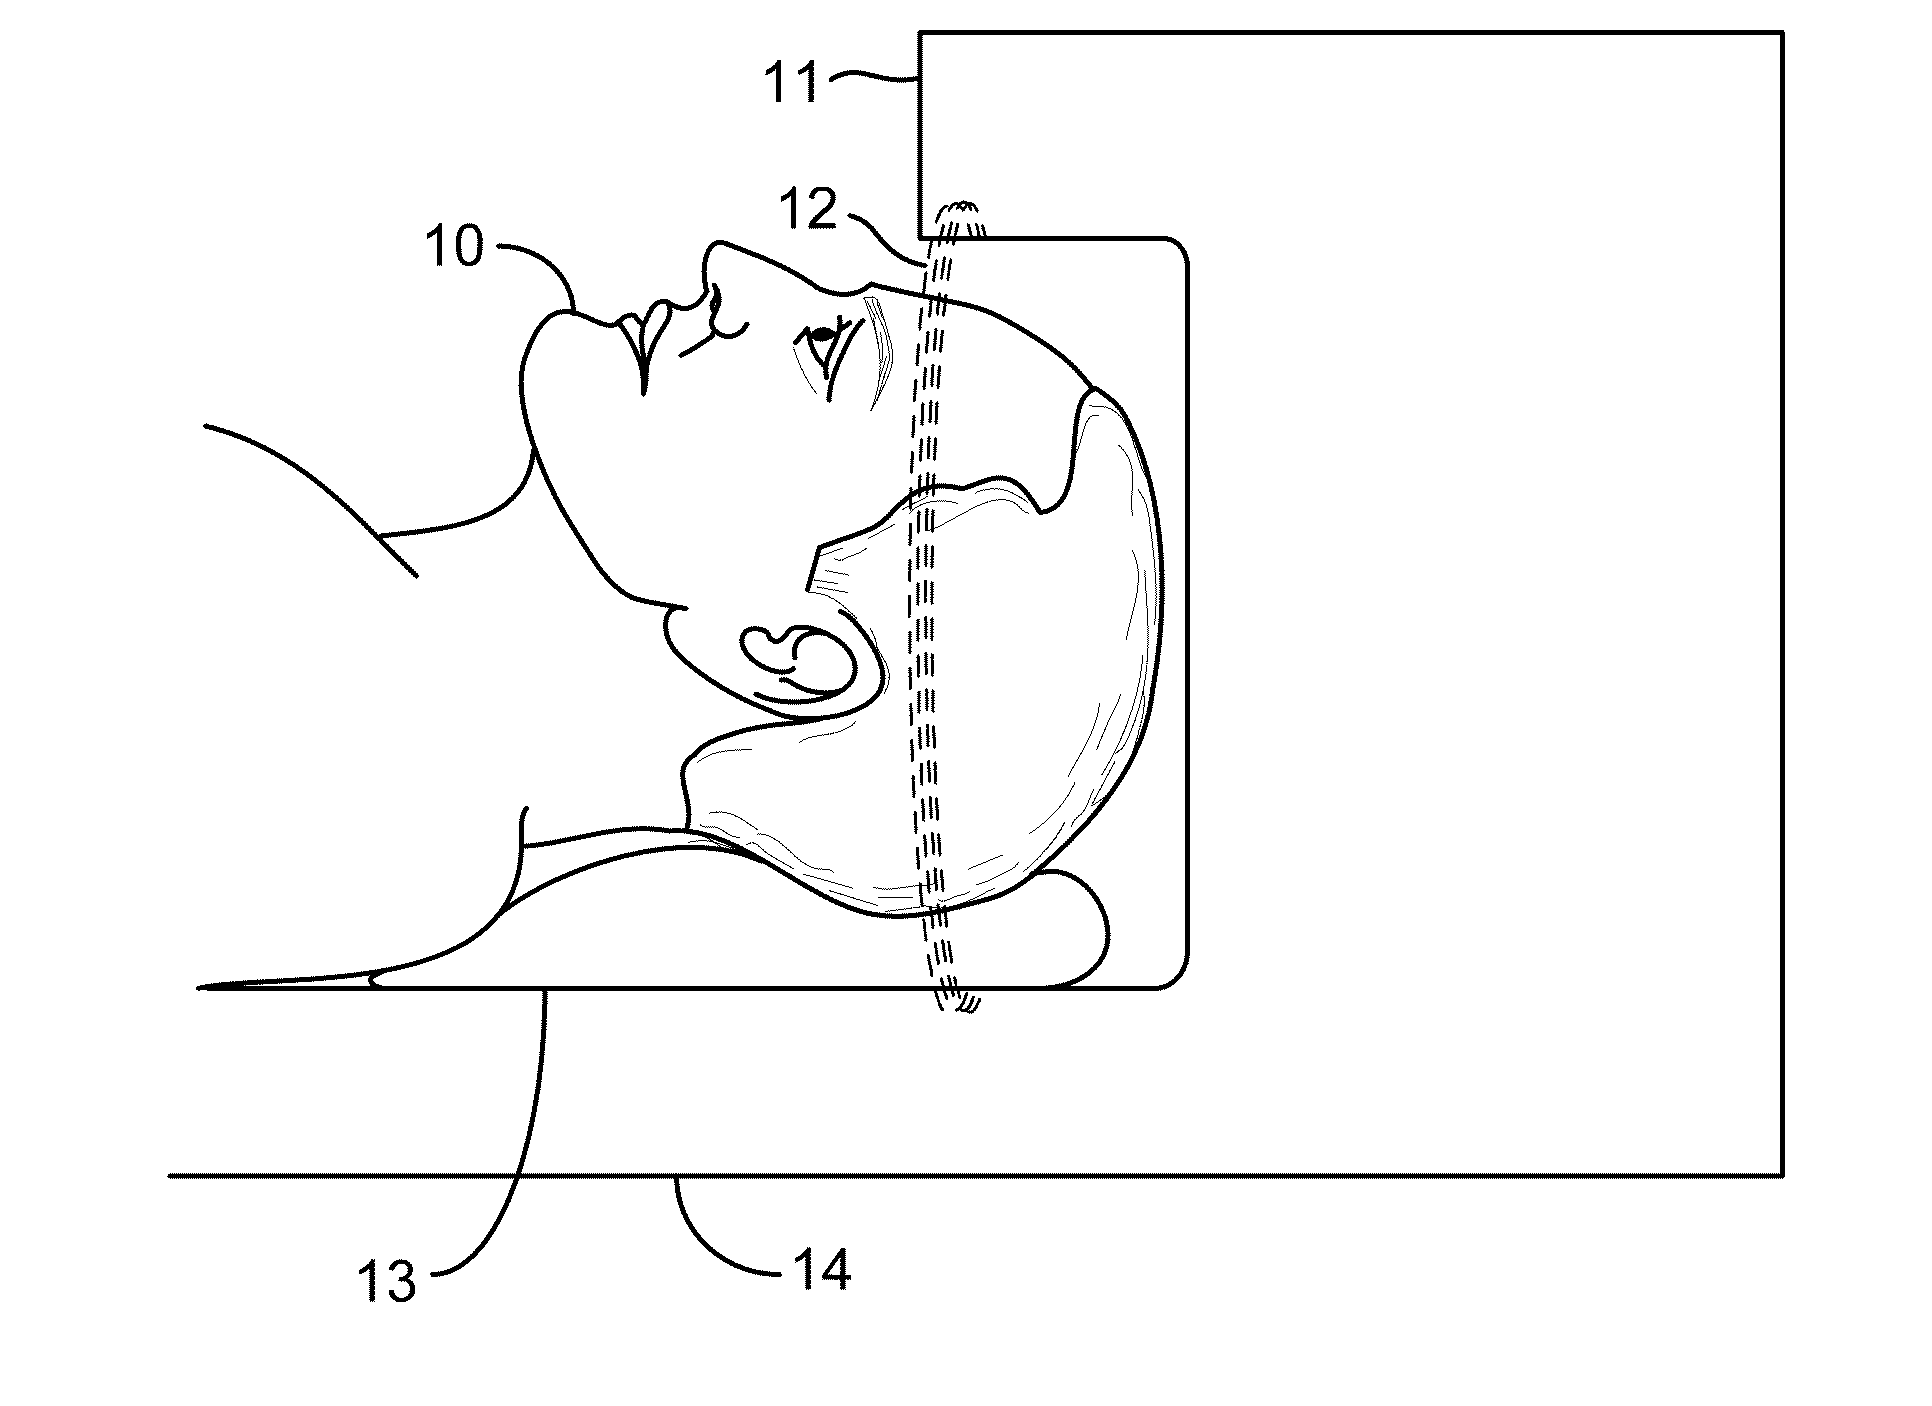 Devices and methods of low frequency magnetic stimulation therapy